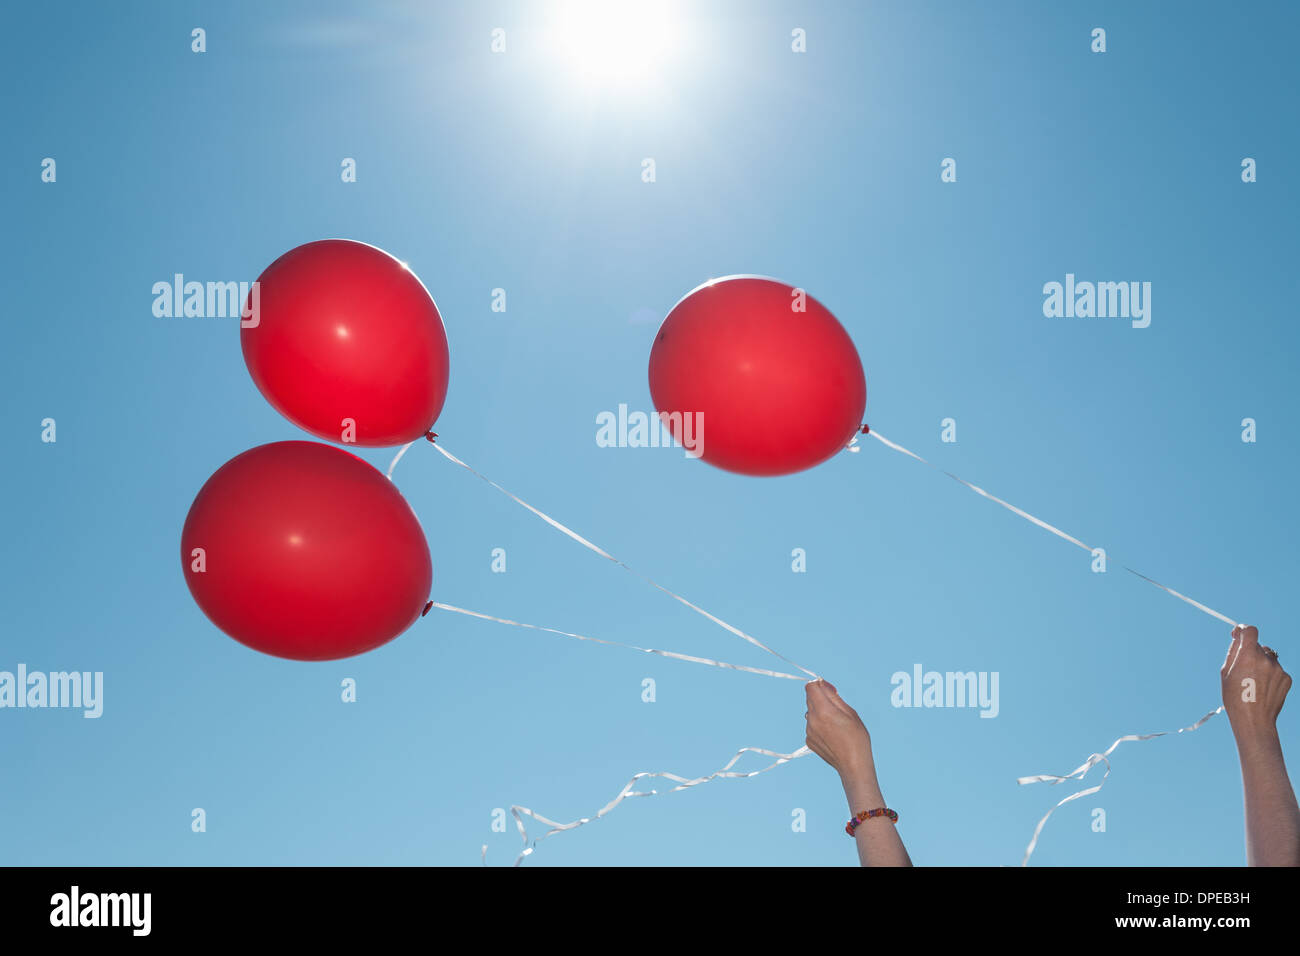 Hands holding three red balloons against blue sky Stock Photo - Alamy